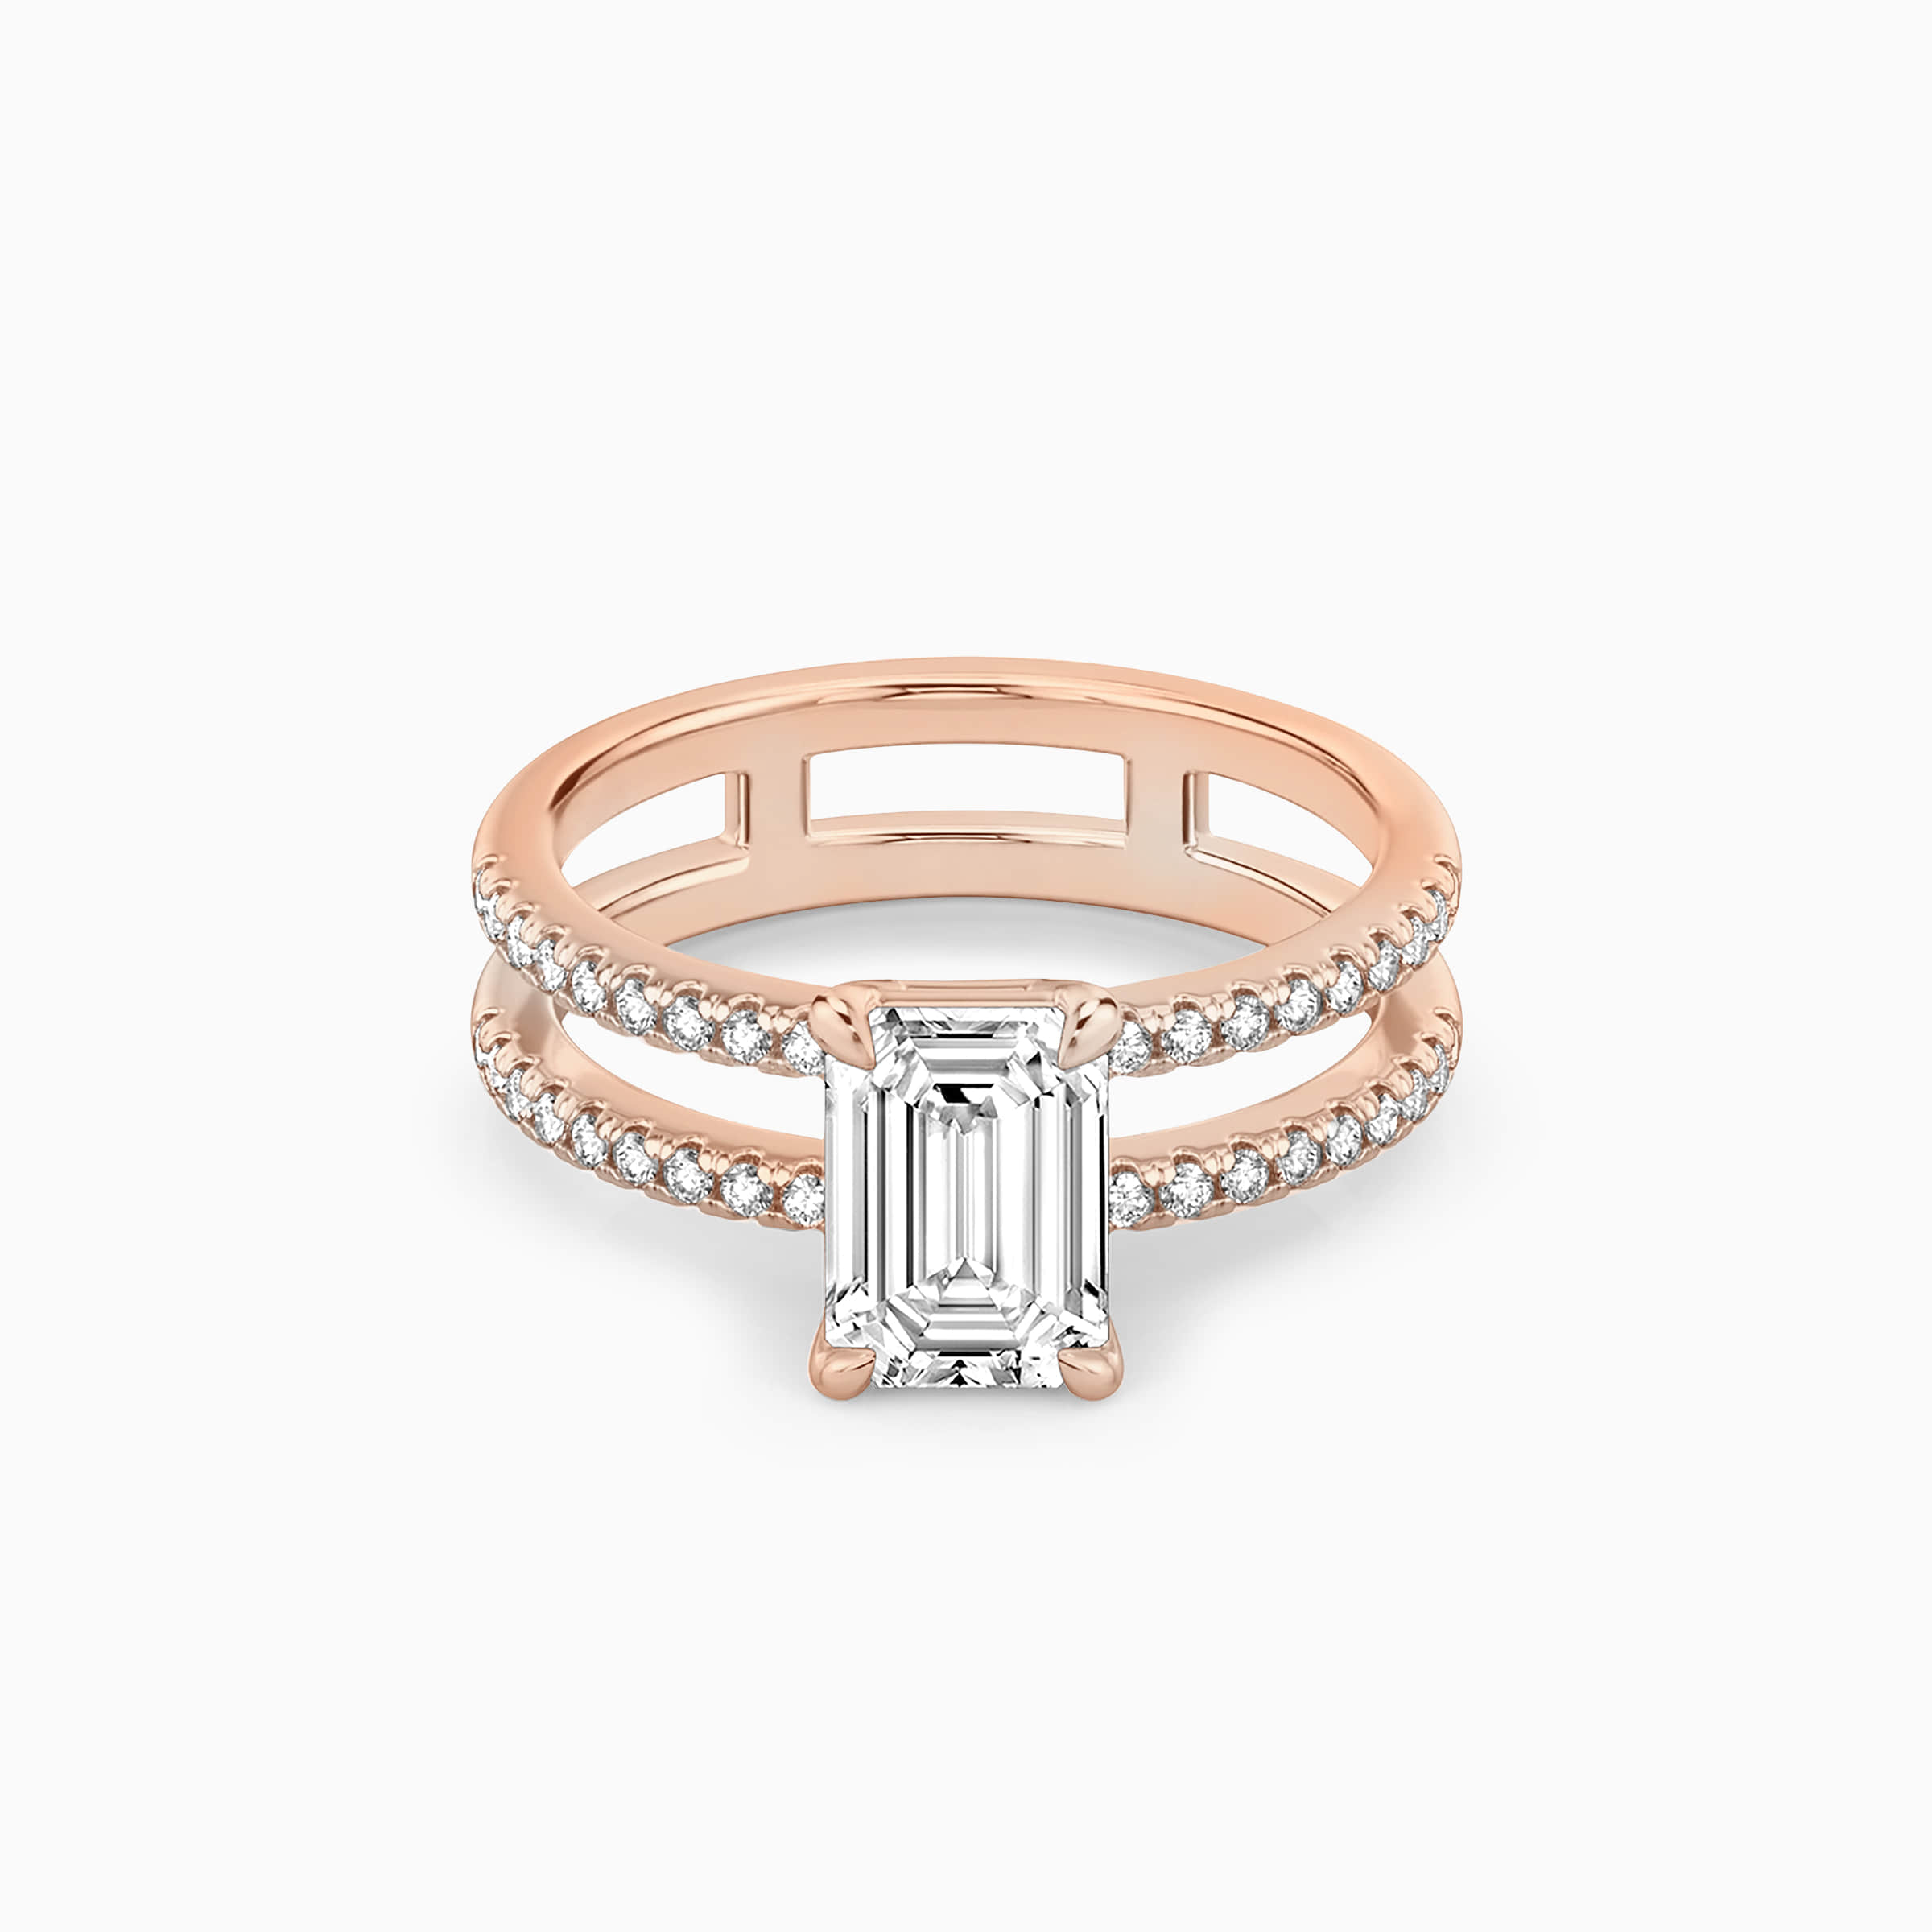 Darry Ring double band emerald cut engagement ring rose gold